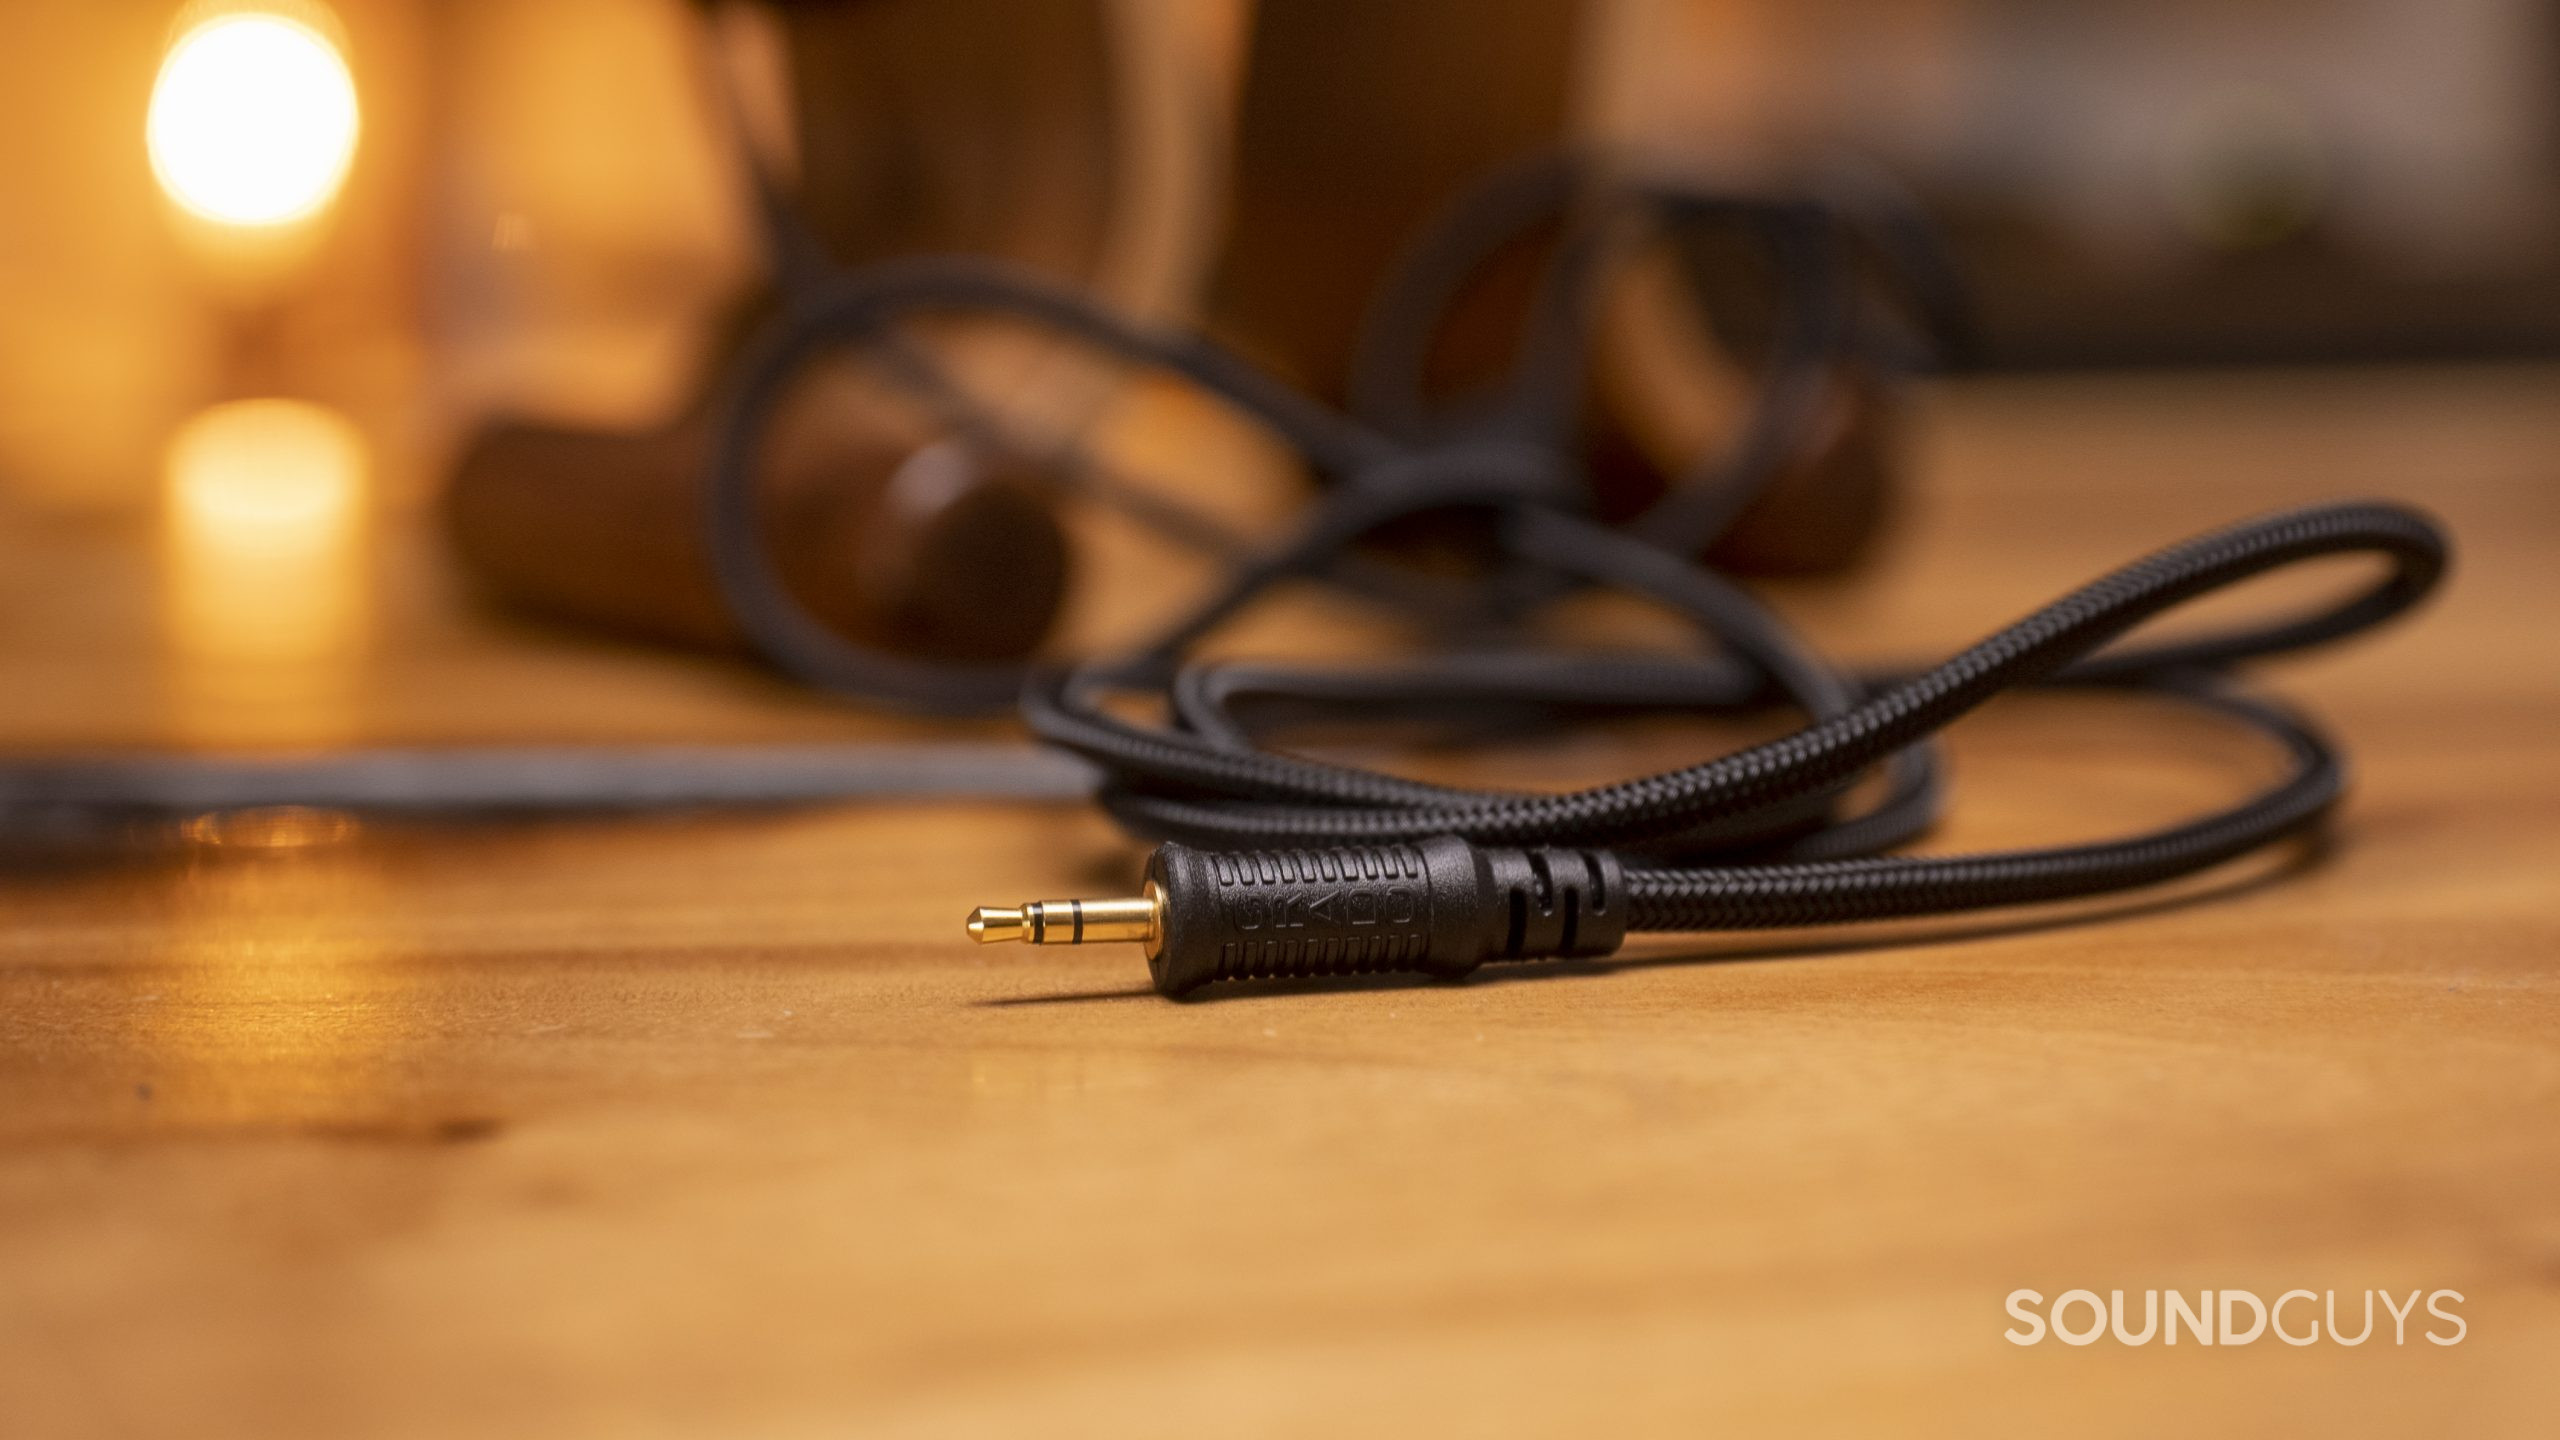 The Grado SR60x mercifully uses a 3.5mm TRRS plug, but has no microphone or other features